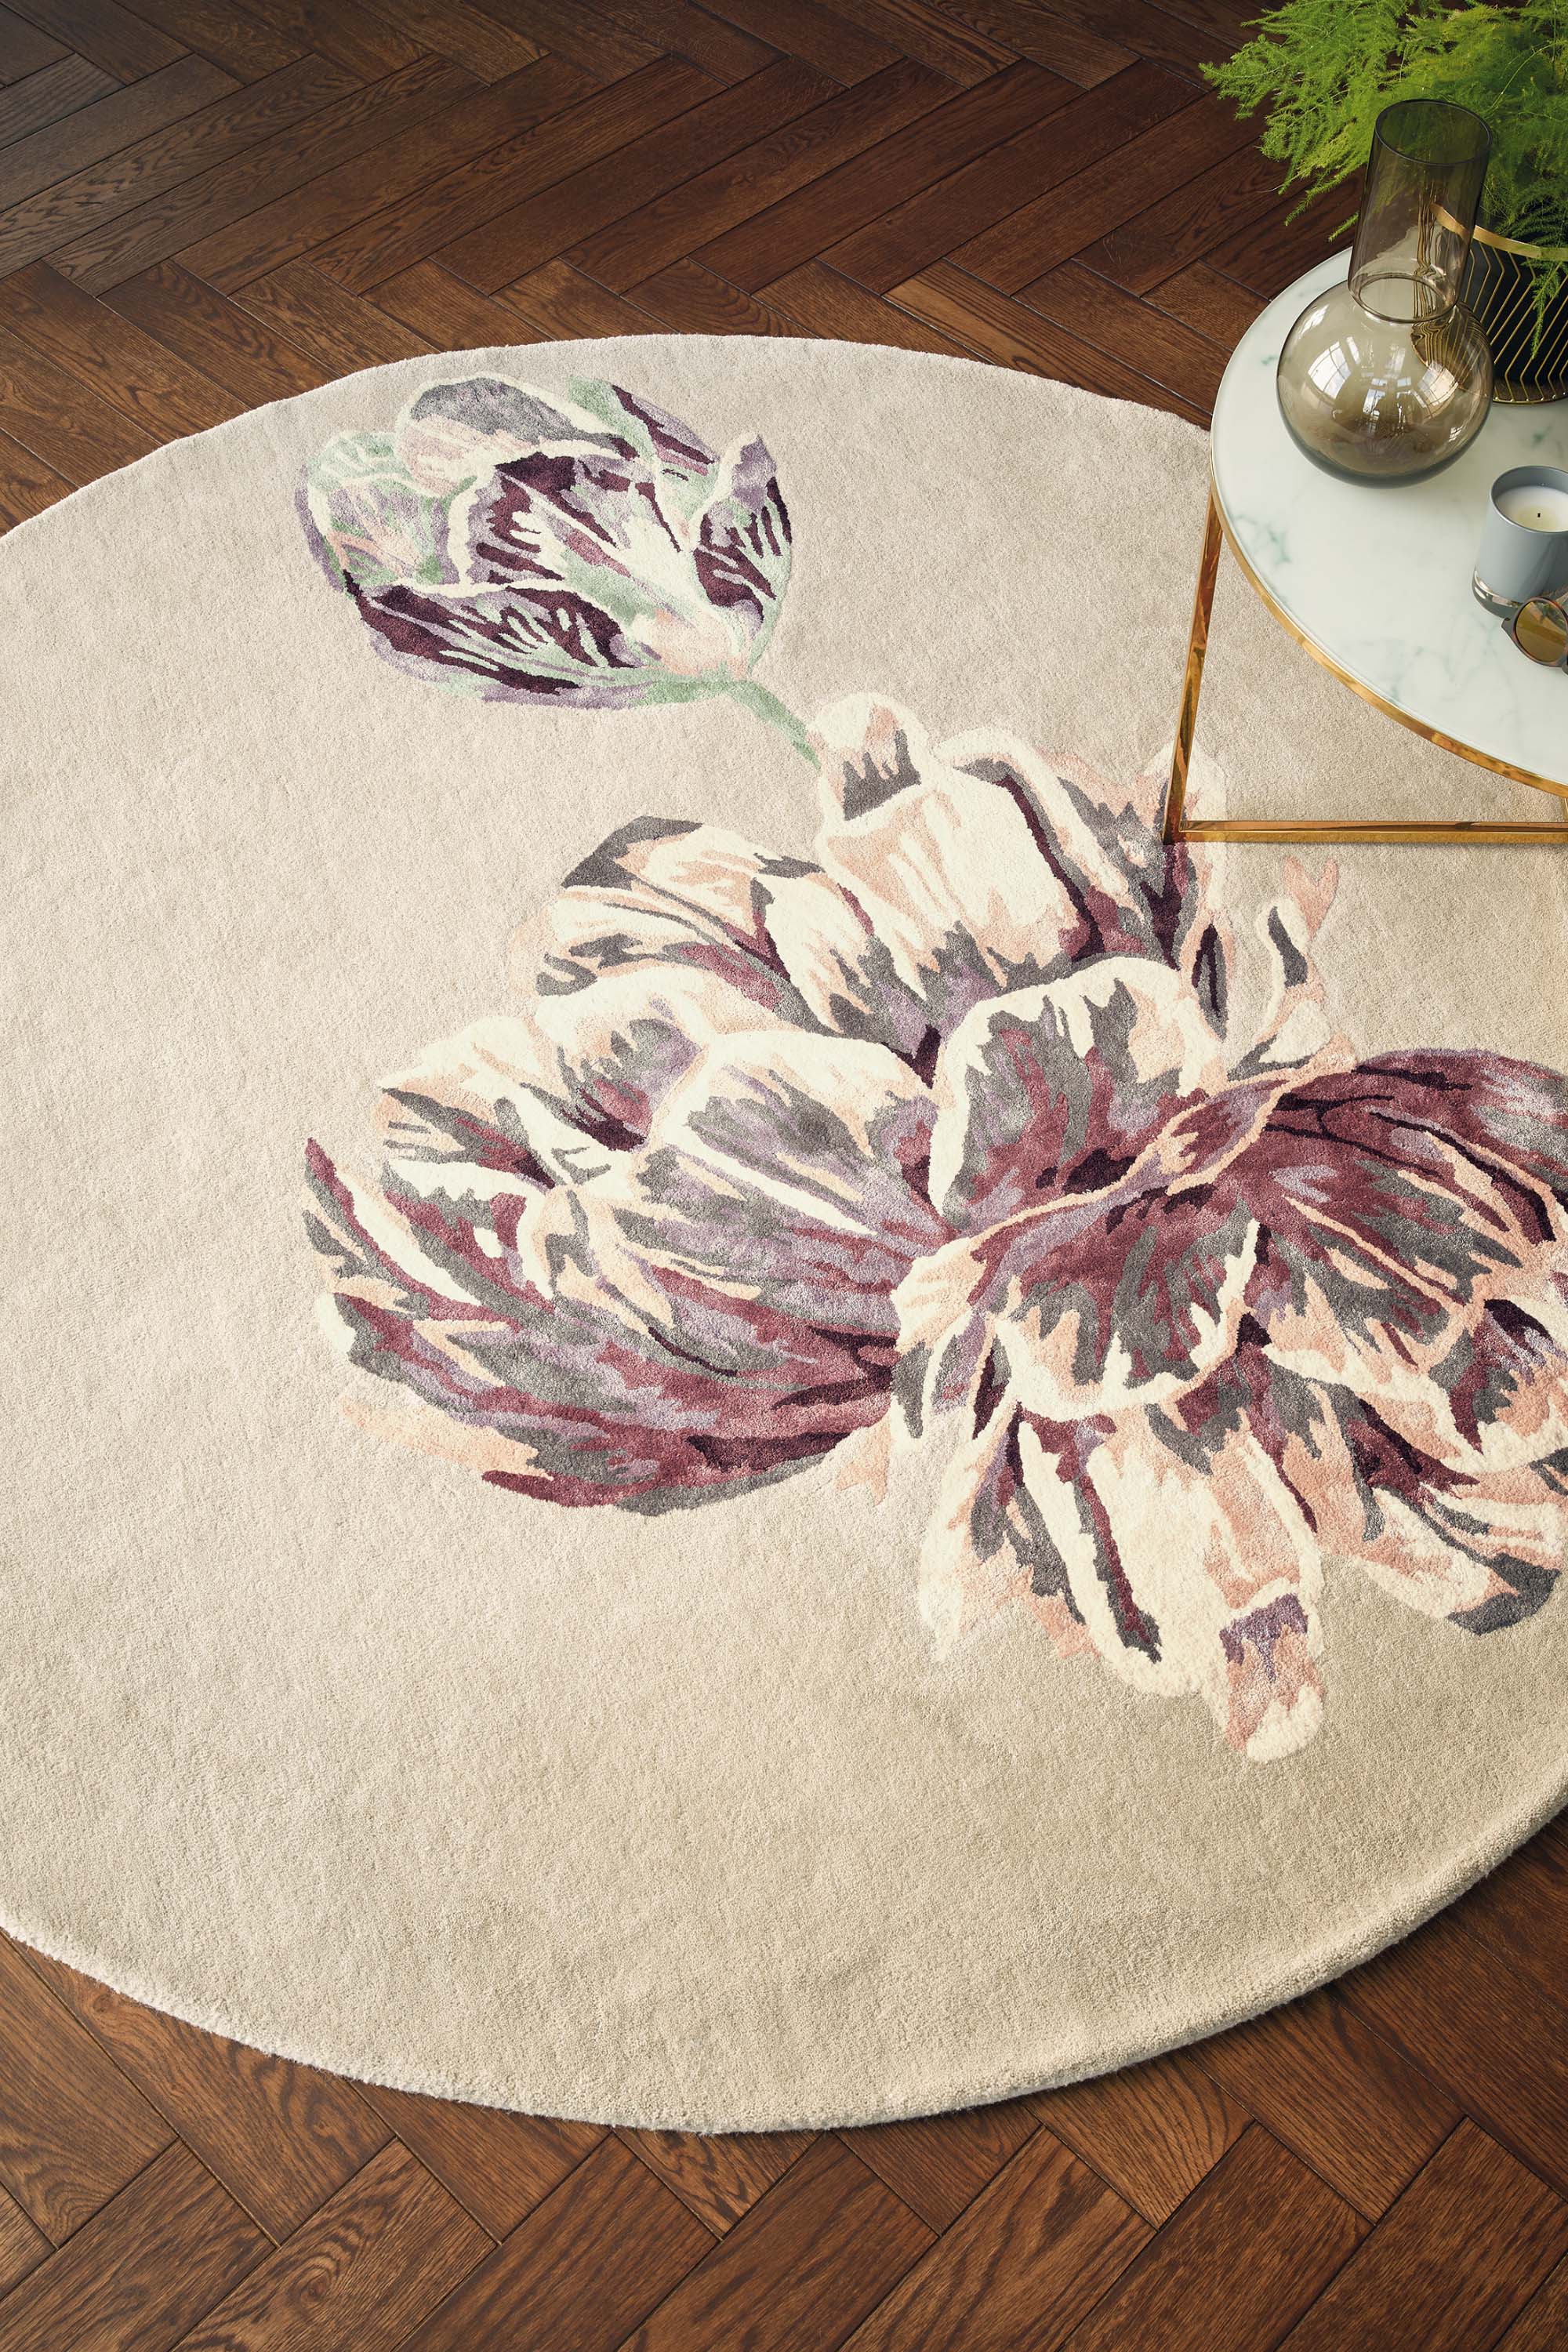 Round beige rug with large white and purple flower motif